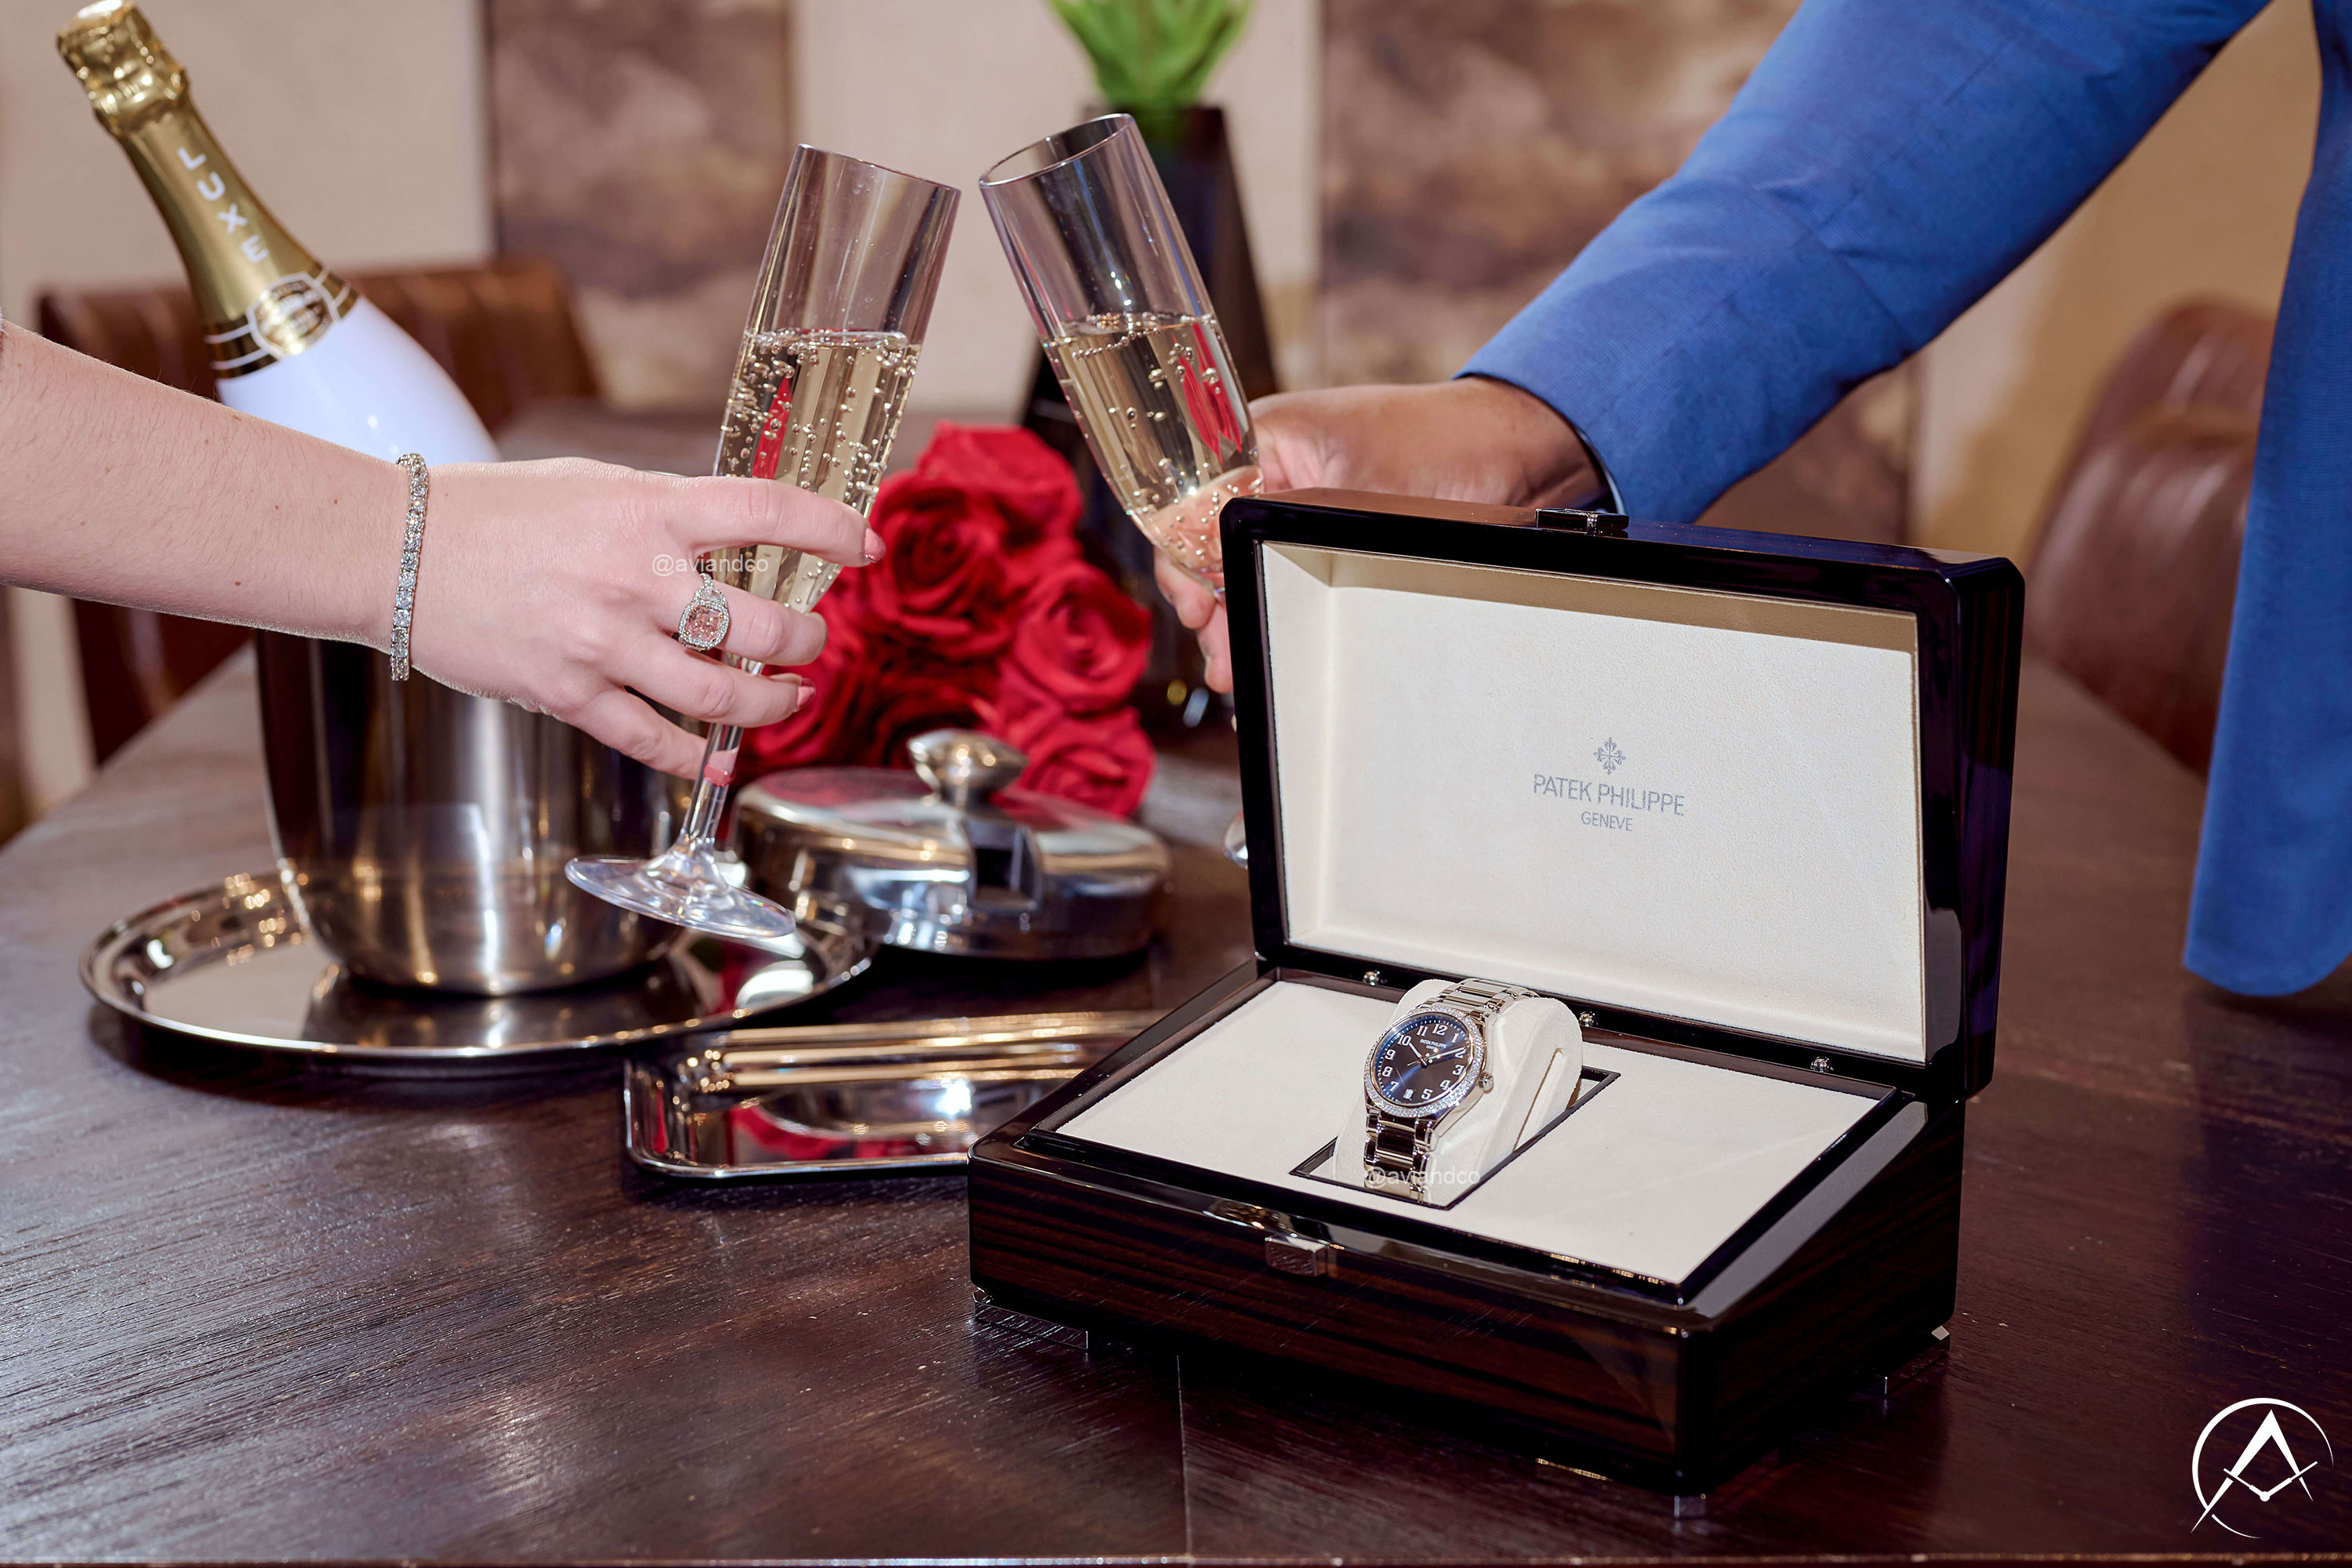 Patek Philippe Twenty~4 Stainless Steel 36 mm Timepiece in a Patek Philippe Dark Brown Watch Box in Front of a Woman and Man’s Hand Clinking Champagne Glasses. Champagne Bottle and Roses Adorn the Wooden Table.